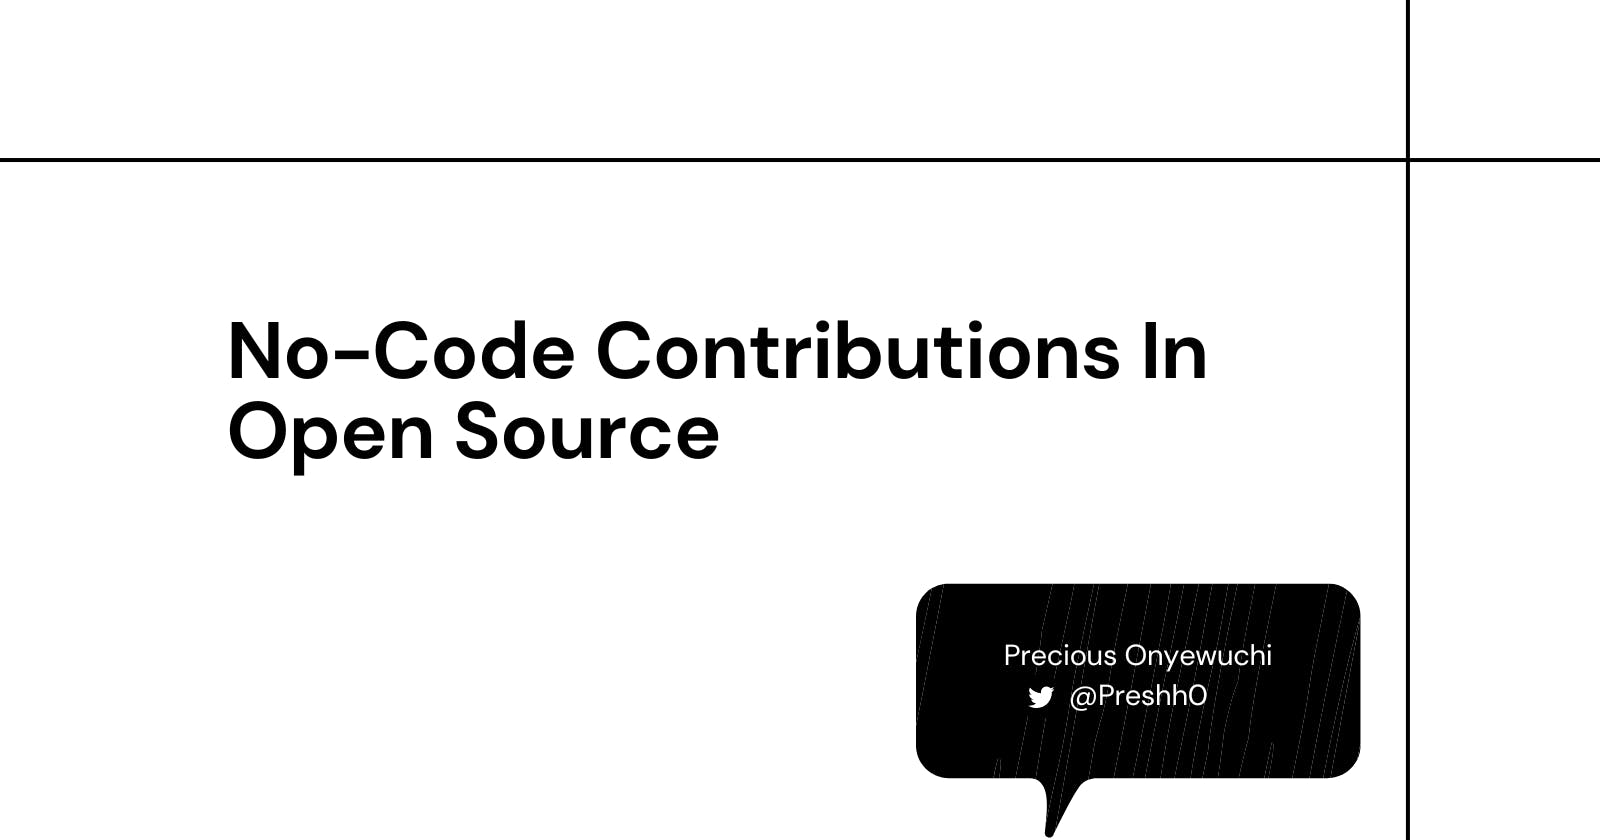 No-Code Contributions In Open Source